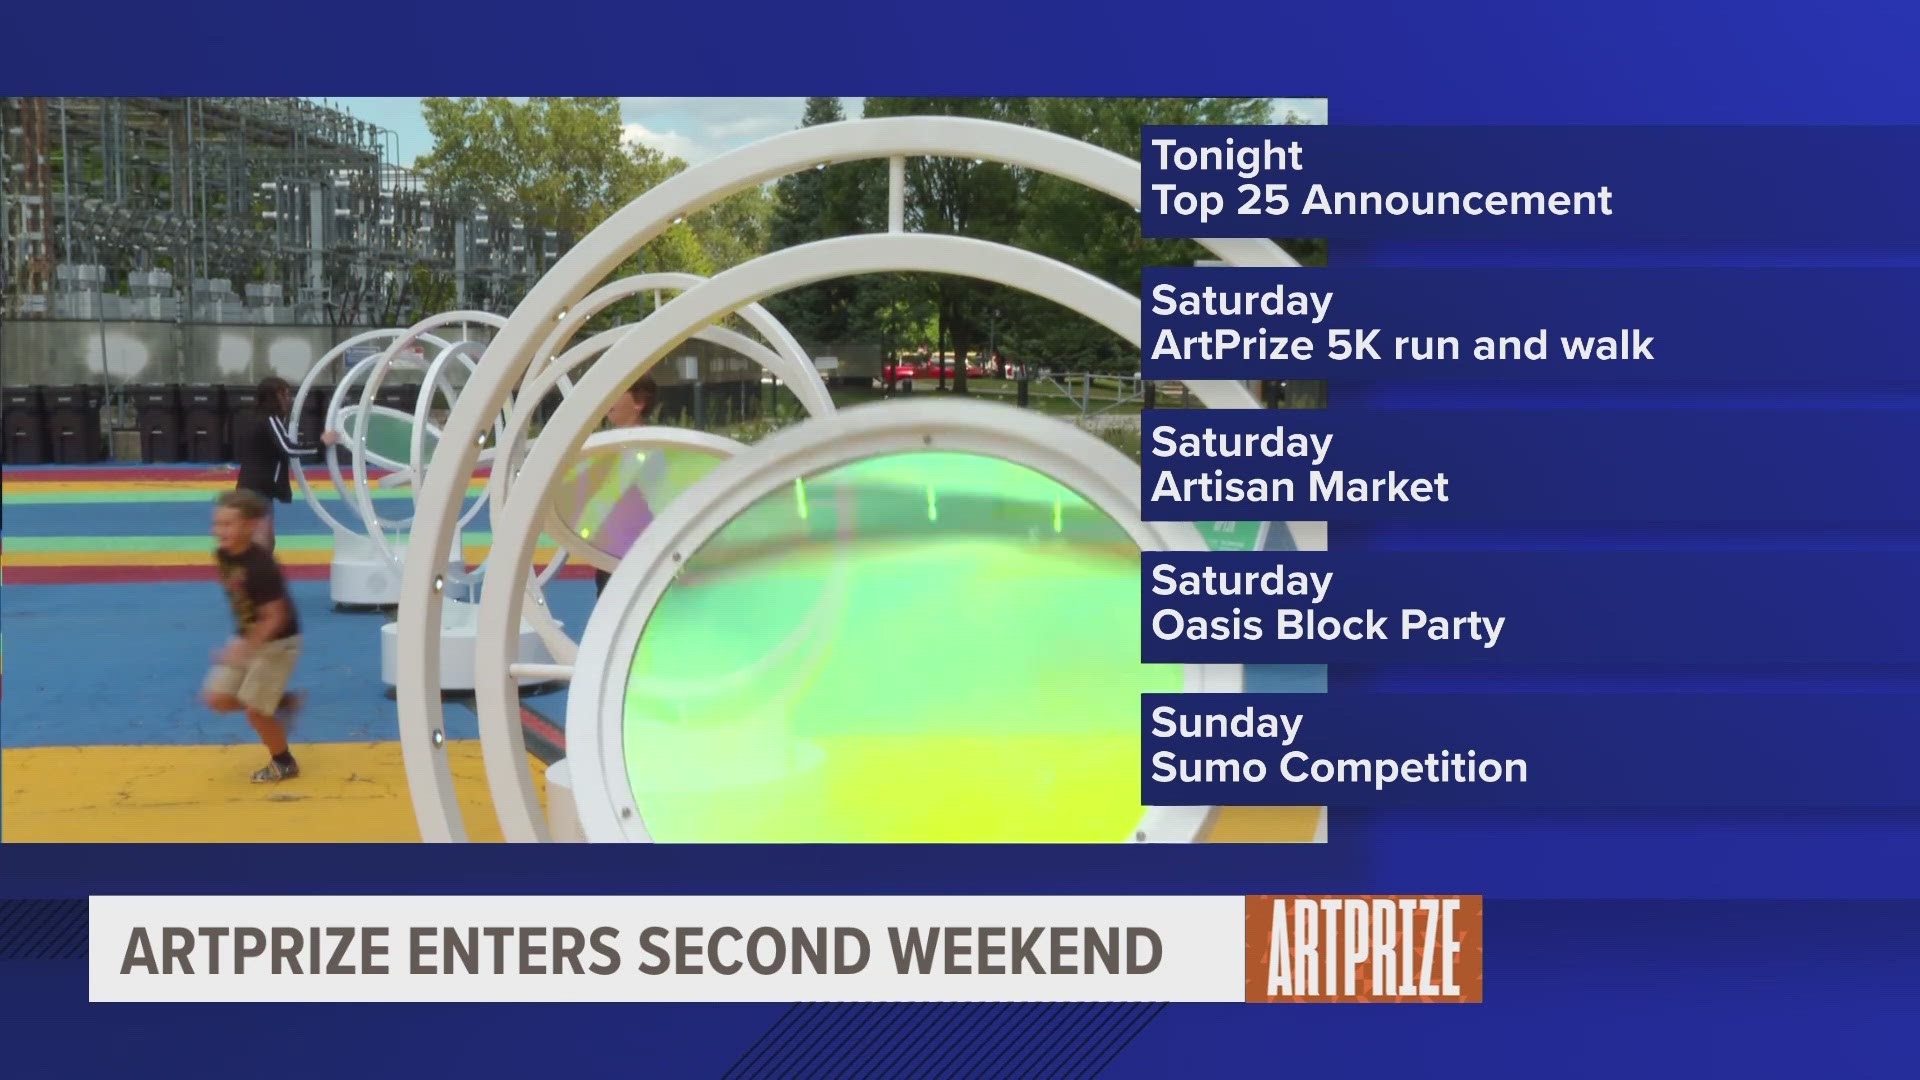 From the Top 25 announcement, a 5k run and walk, to an artisan market, the second weekend of ArtPrize is gearing up to be a great one.